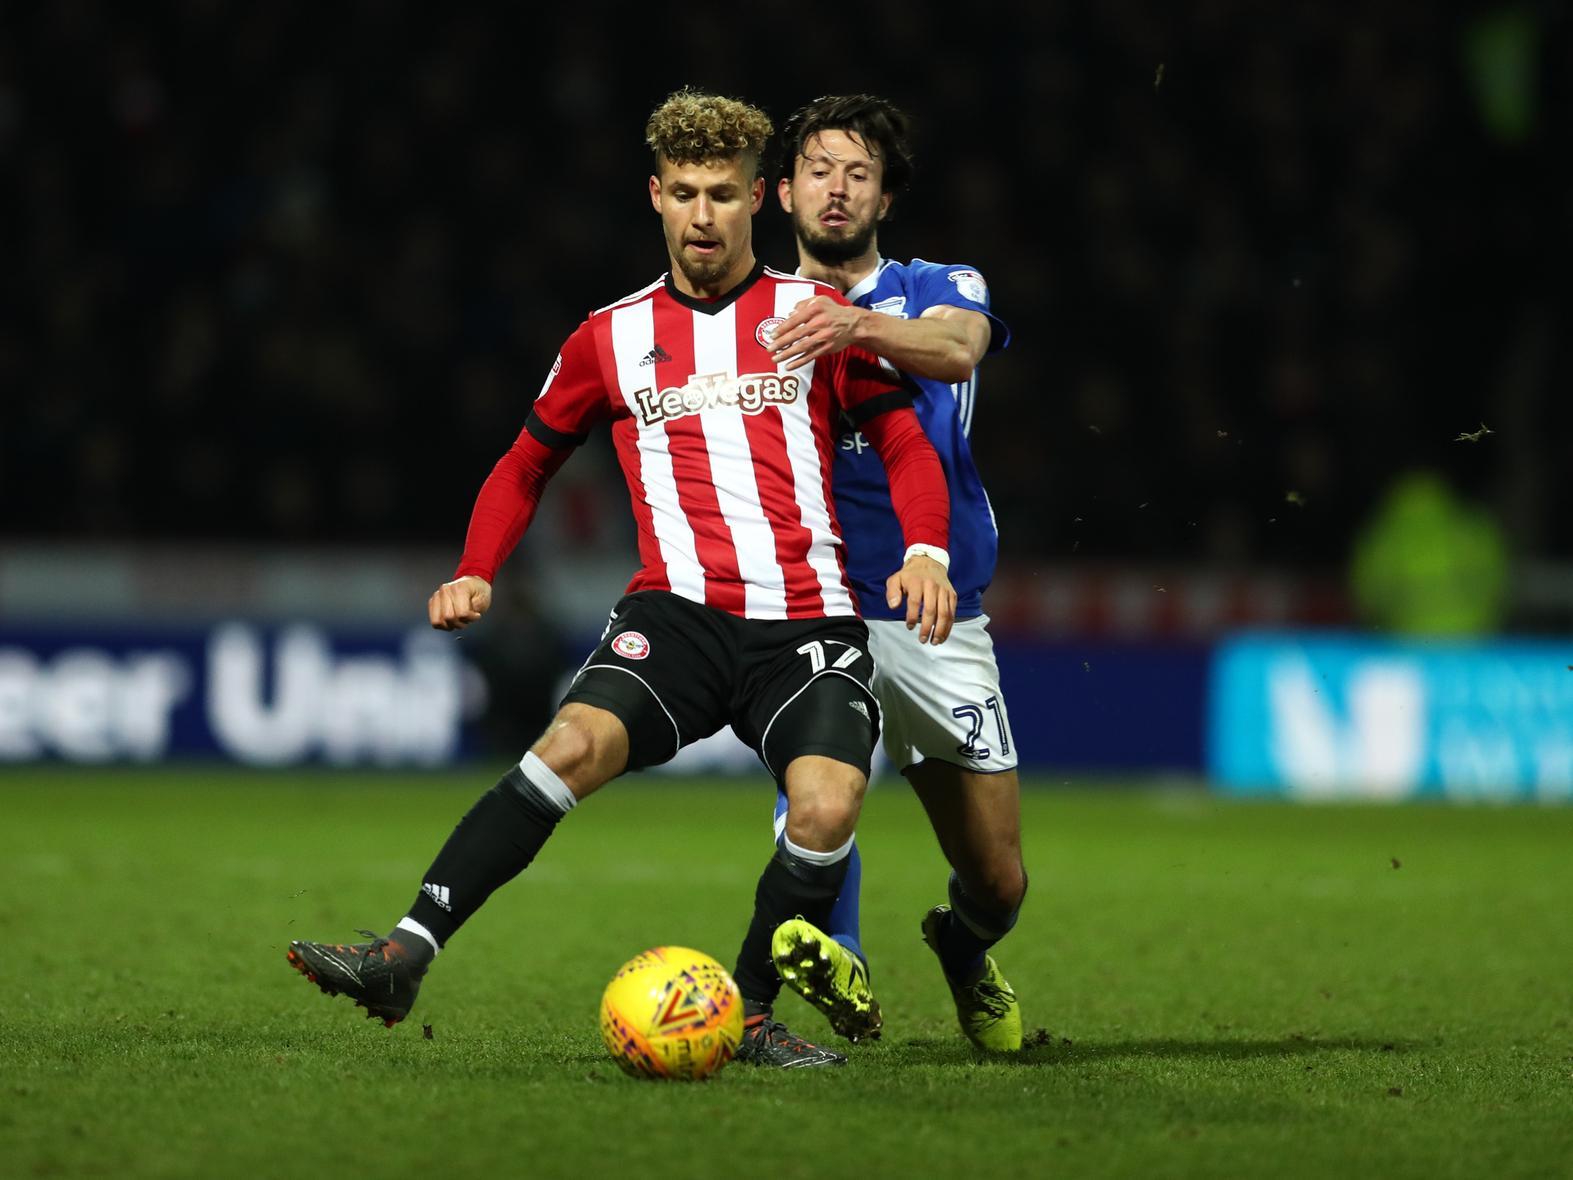 Brentford midfielder Emiliano Marcondes looks like he could remain with his loan clubFC Midtjylland beyond his current loan spell, and extend his deal until the summer. (Sport Witness)